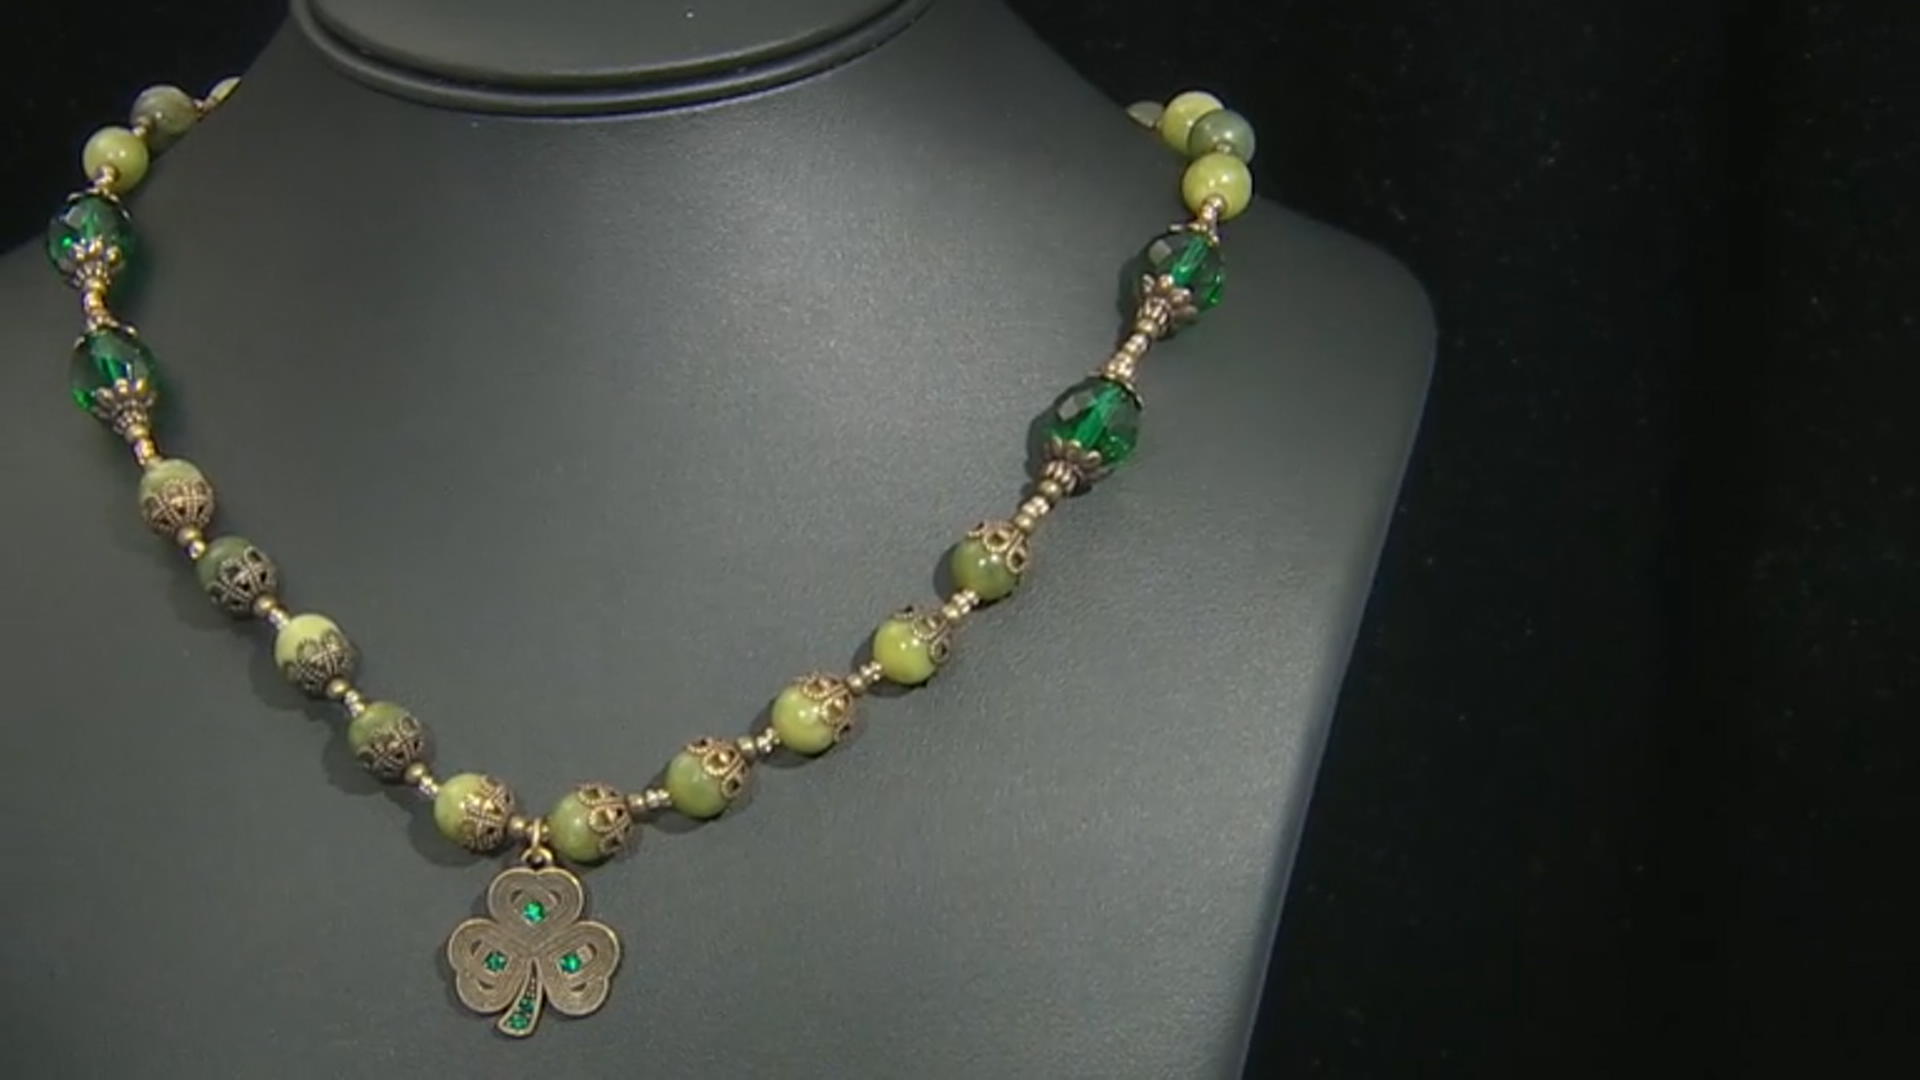 Connemara Marble With Green Crystal Antiqued-Tone Necklace Video Thumbnail